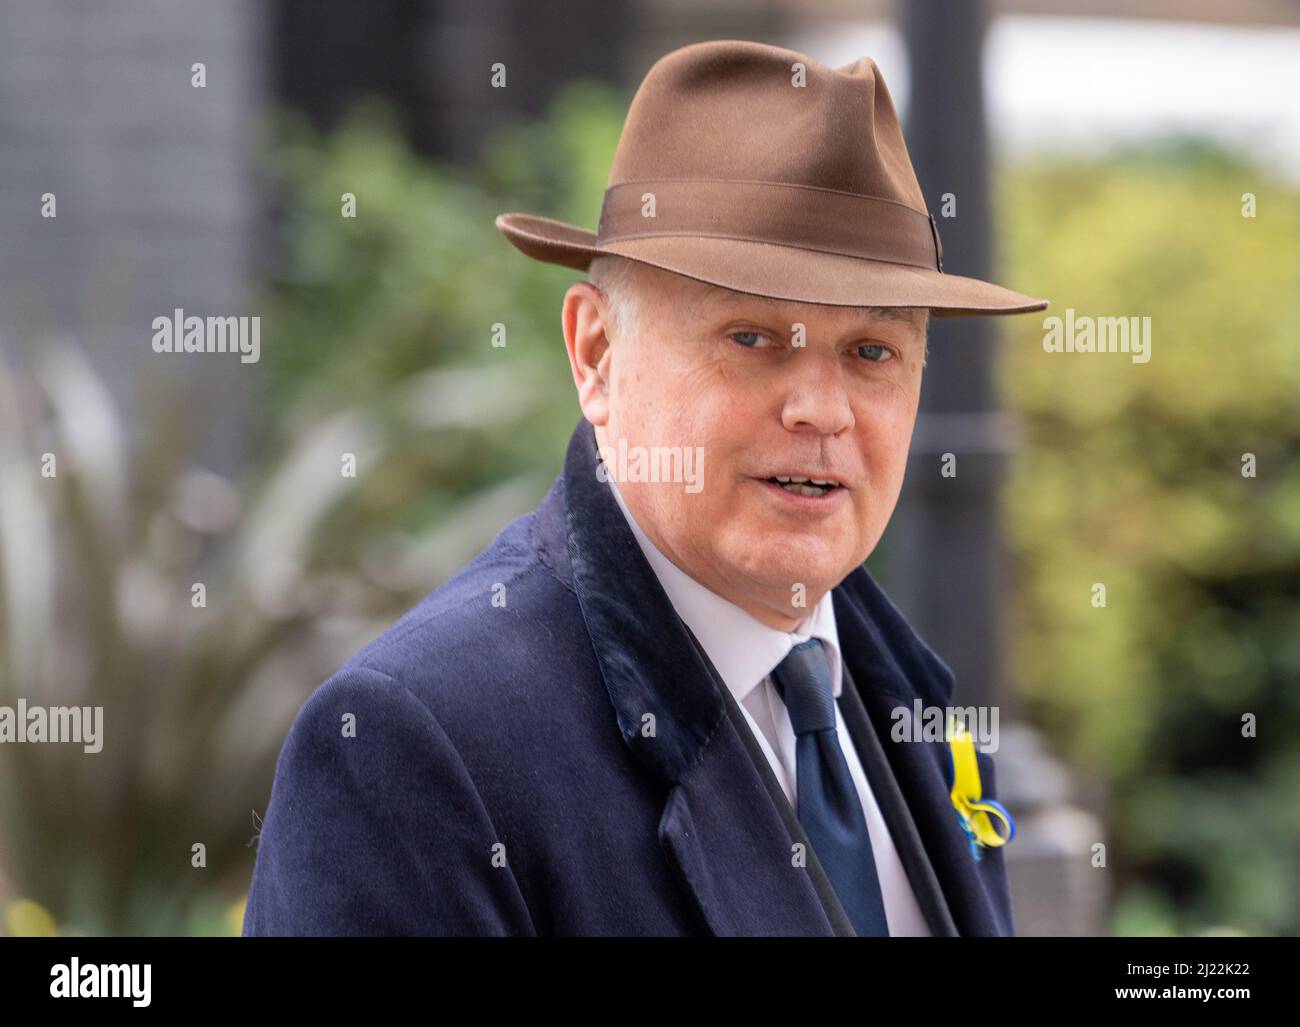 London, UK. 29th Mar, 2022. Senior Conservative MP's in Downing Street, London Pictured Sir Iain Duncan Smith, IDS, MP for Chingford and Woodford Green Credit: Ian Davidson/Alamy Live News Stock Photo